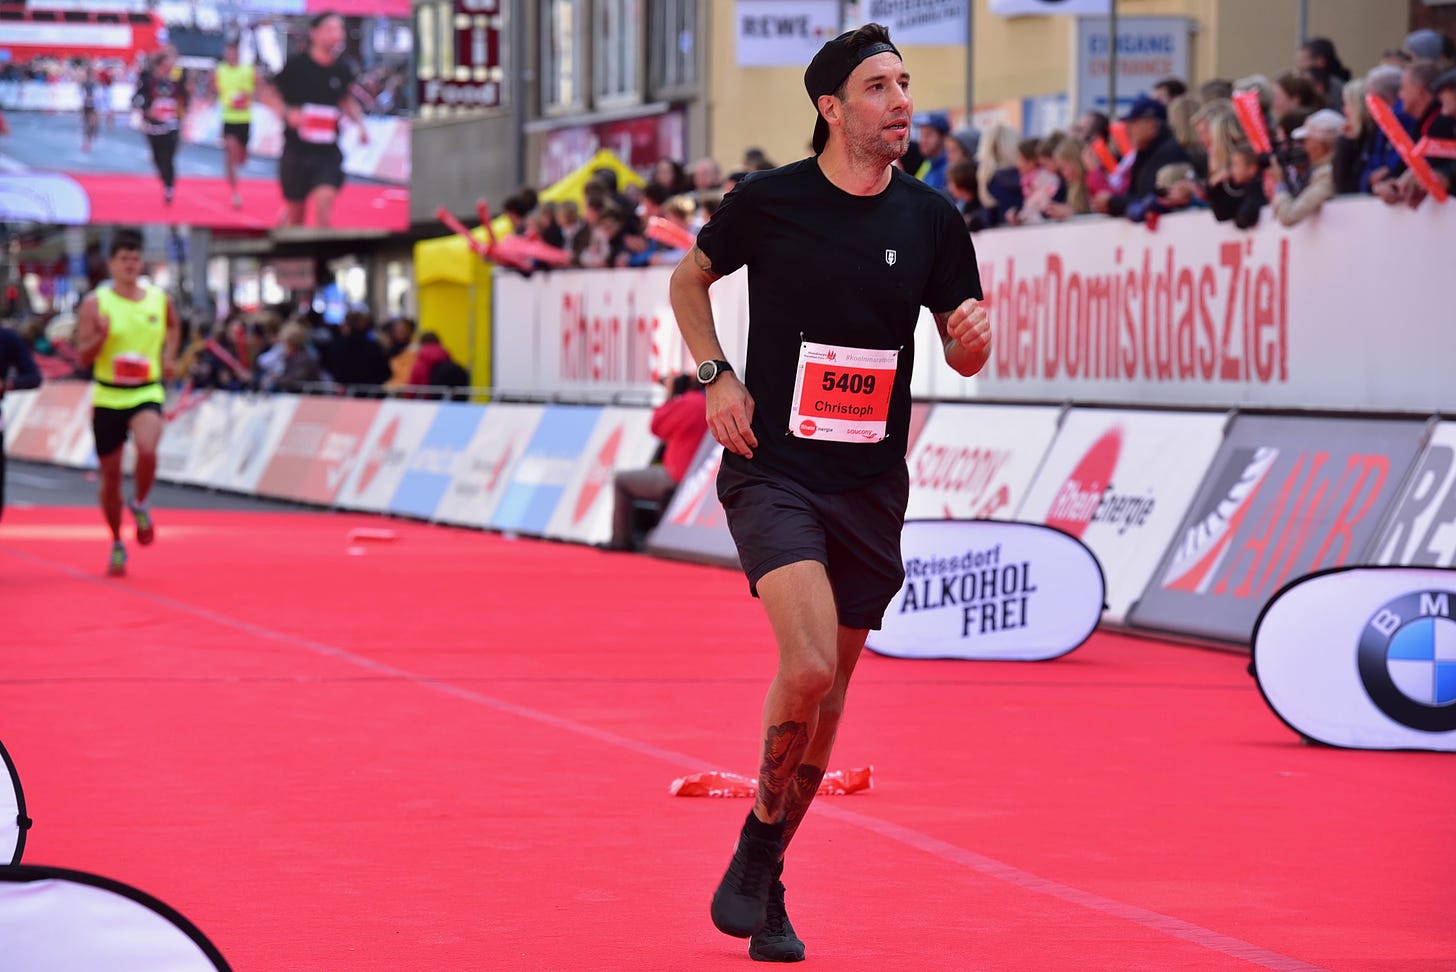 The author crossing the finish line at the Cologne Marathon